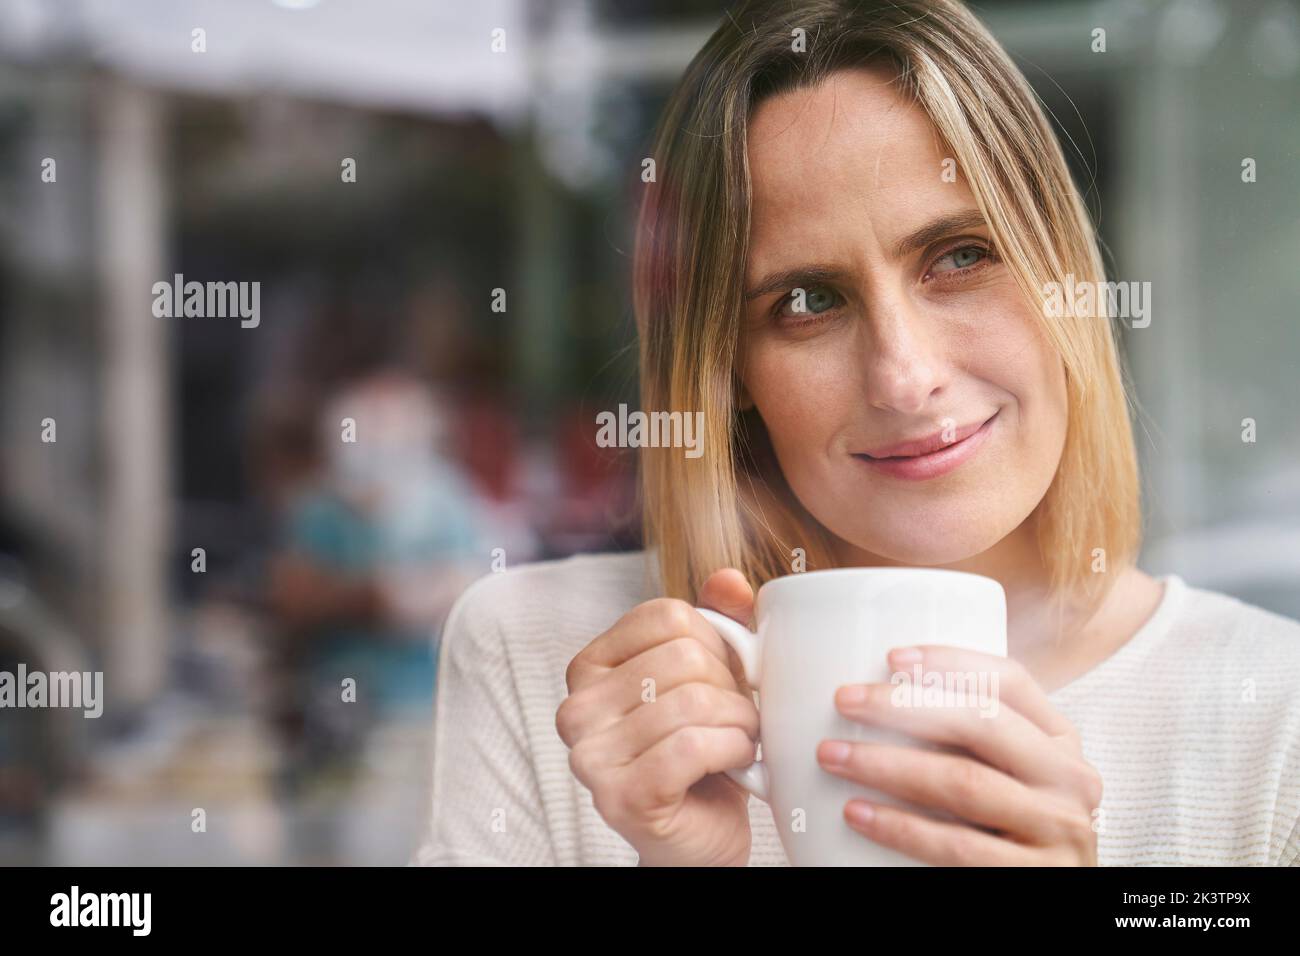 Mid-shot portrait of attractive woman holding a cup of coffee and enjoying the moment Stock Photo